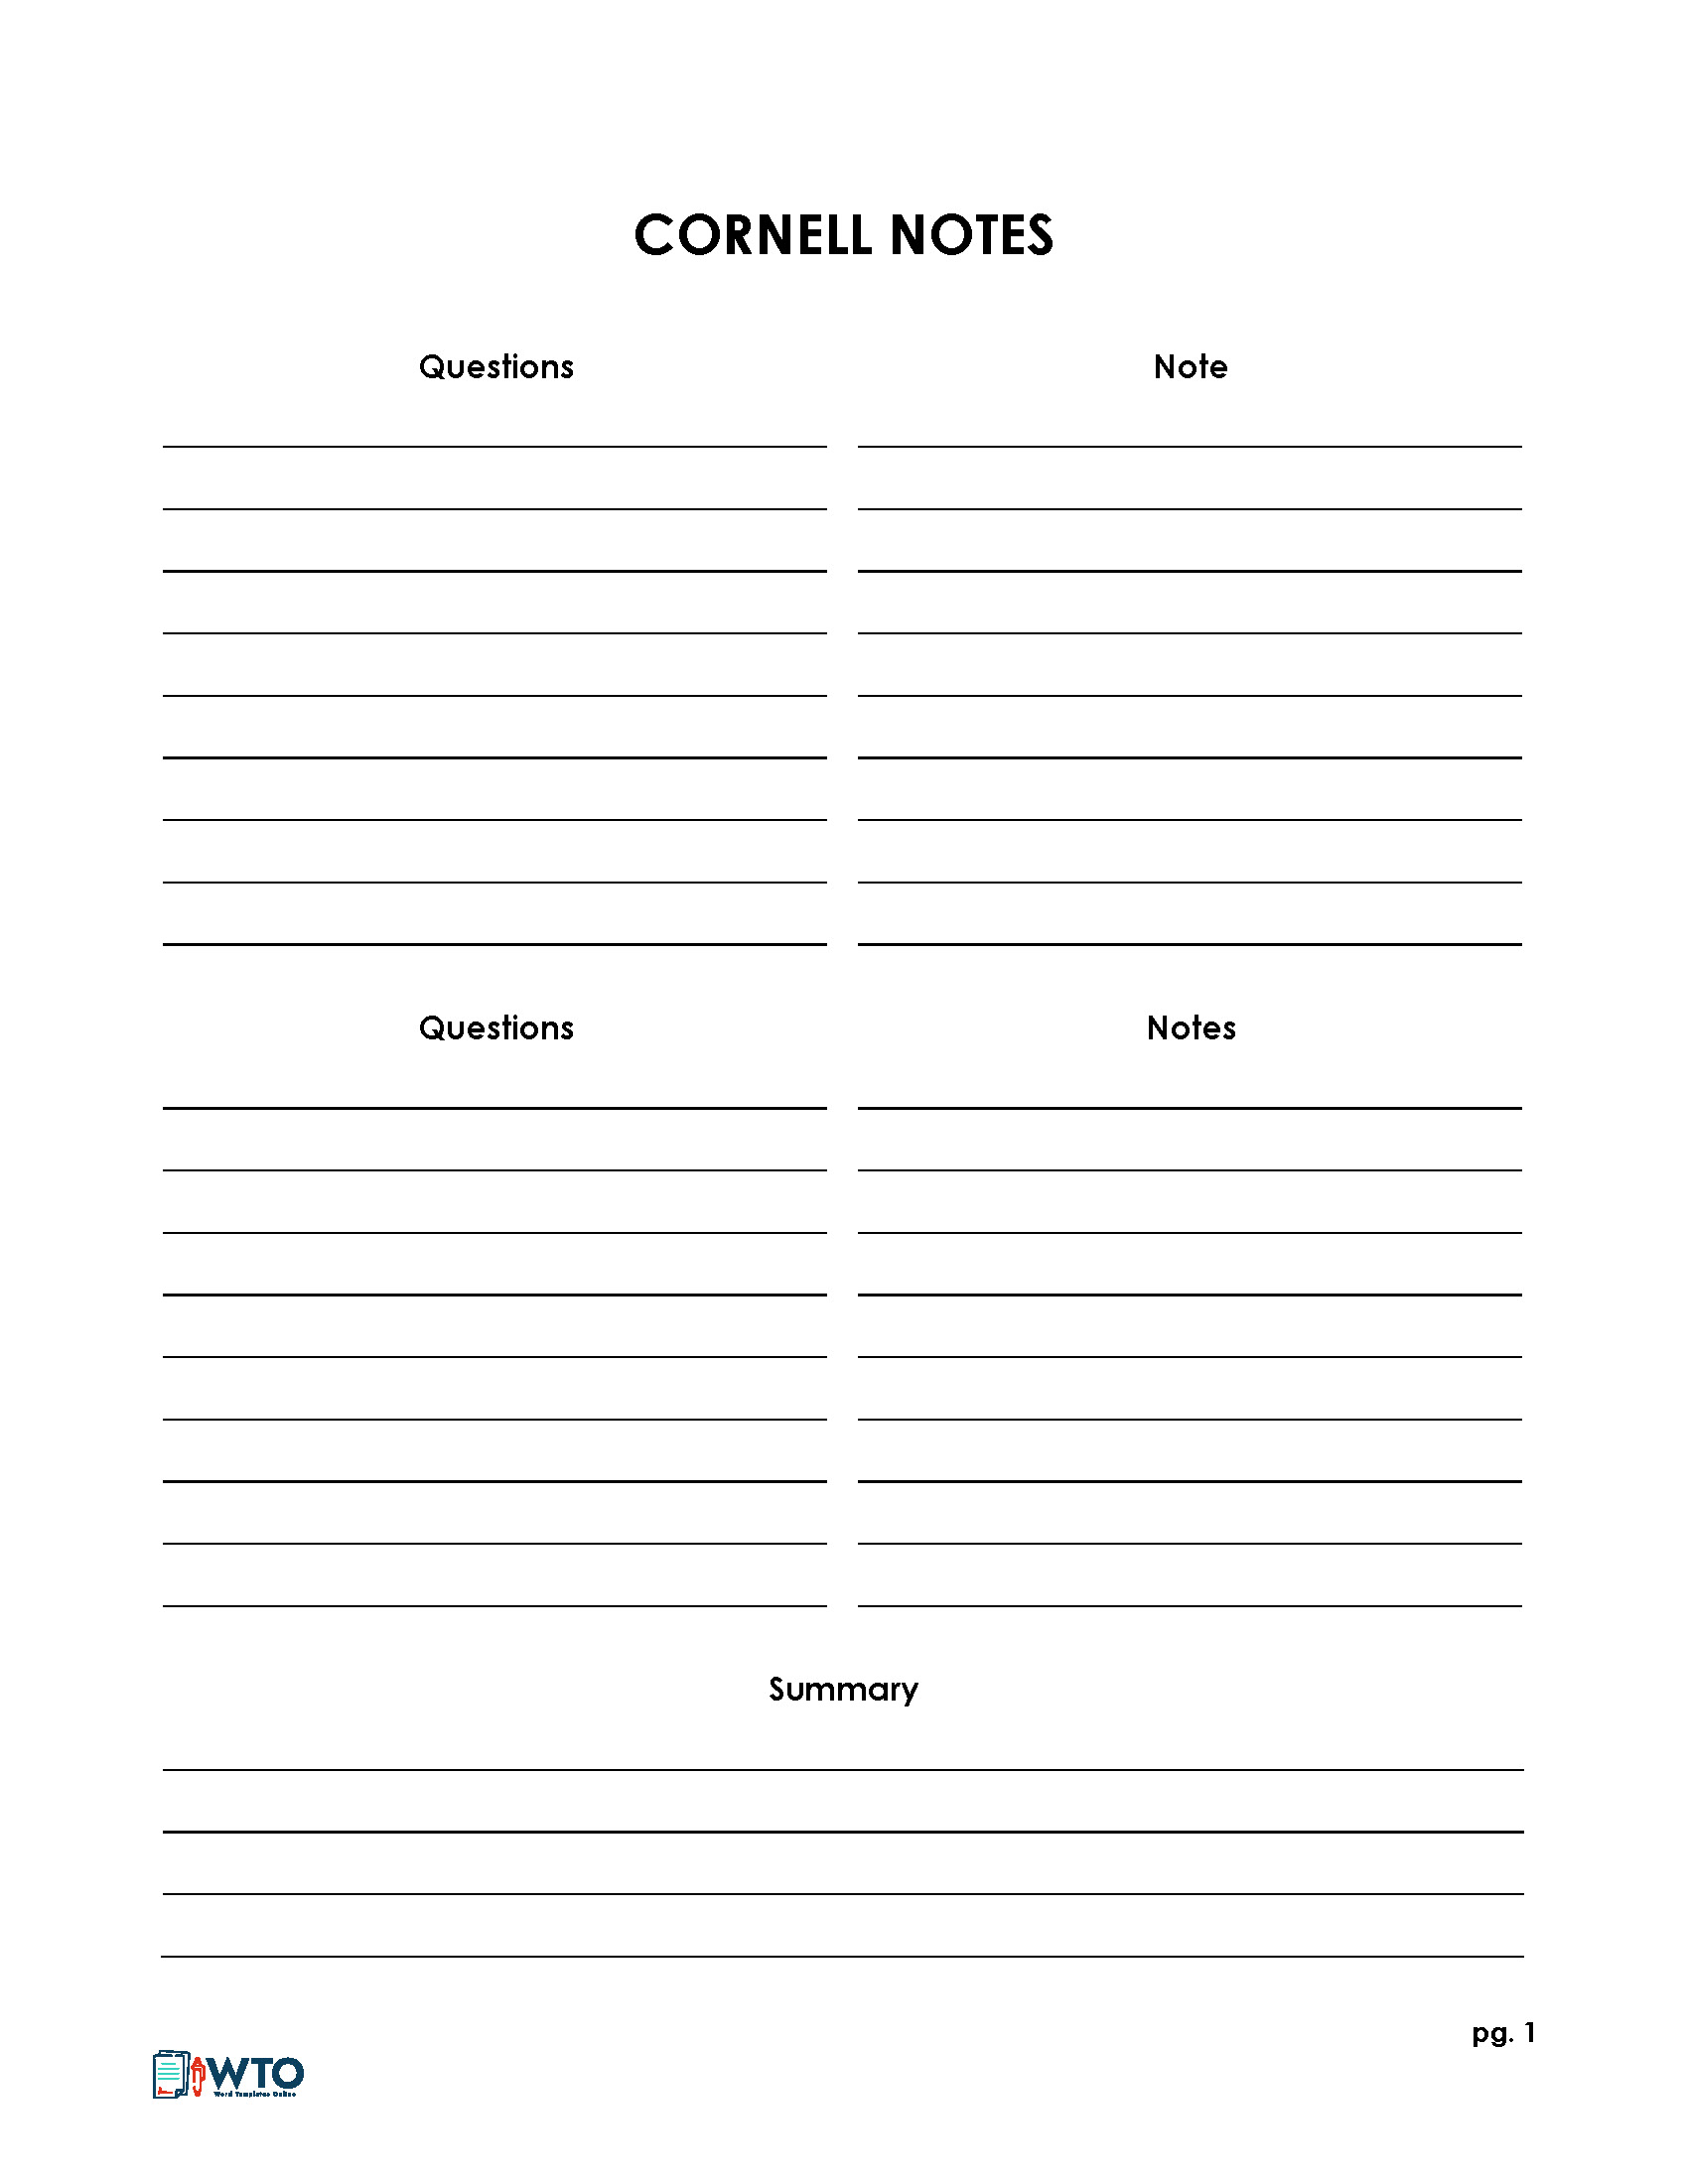 64 Free Cornell Note Templates (Cornell Note Taking Explained)